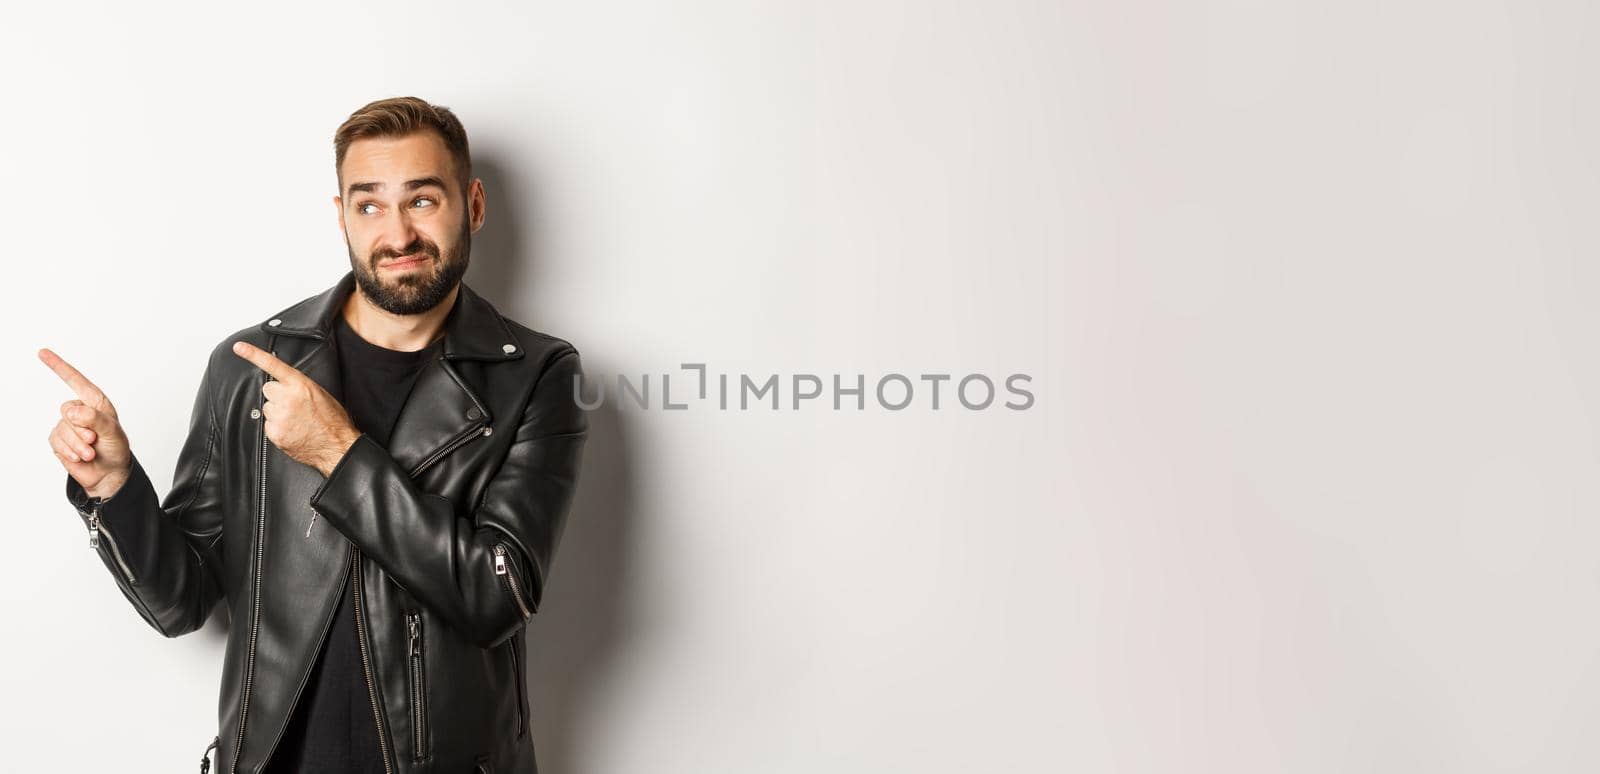 Skeptical and doubtful guy in black leather jacket, shrugging while pointing at upper left corner promo offer, standing over white background.